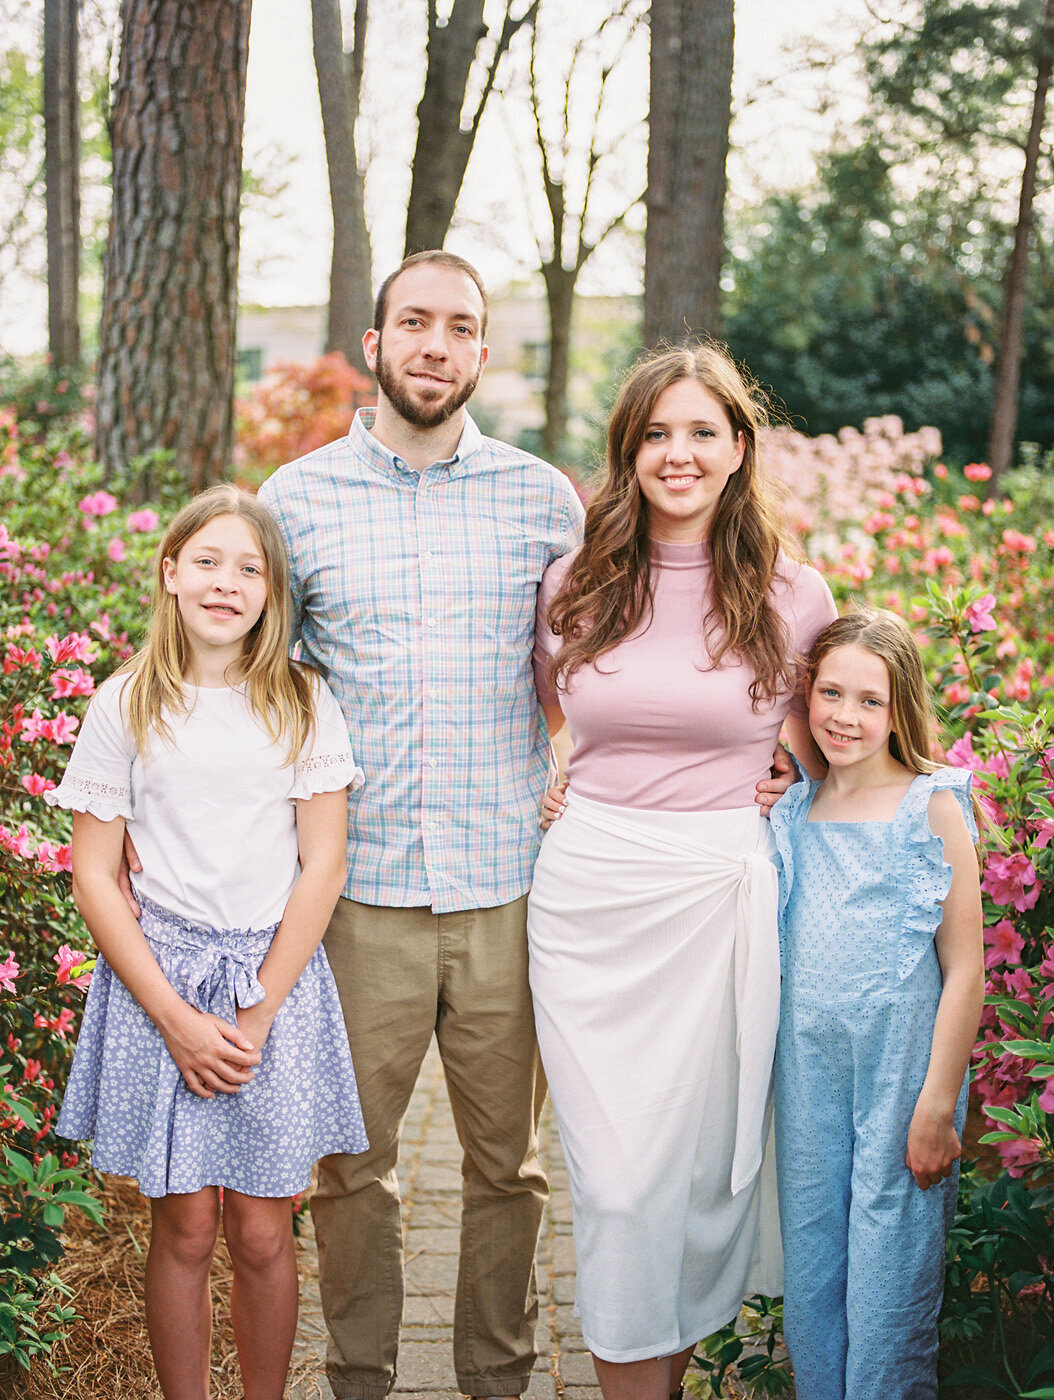 Raleigh Family Photographer | Jessica Agee Photography - 046